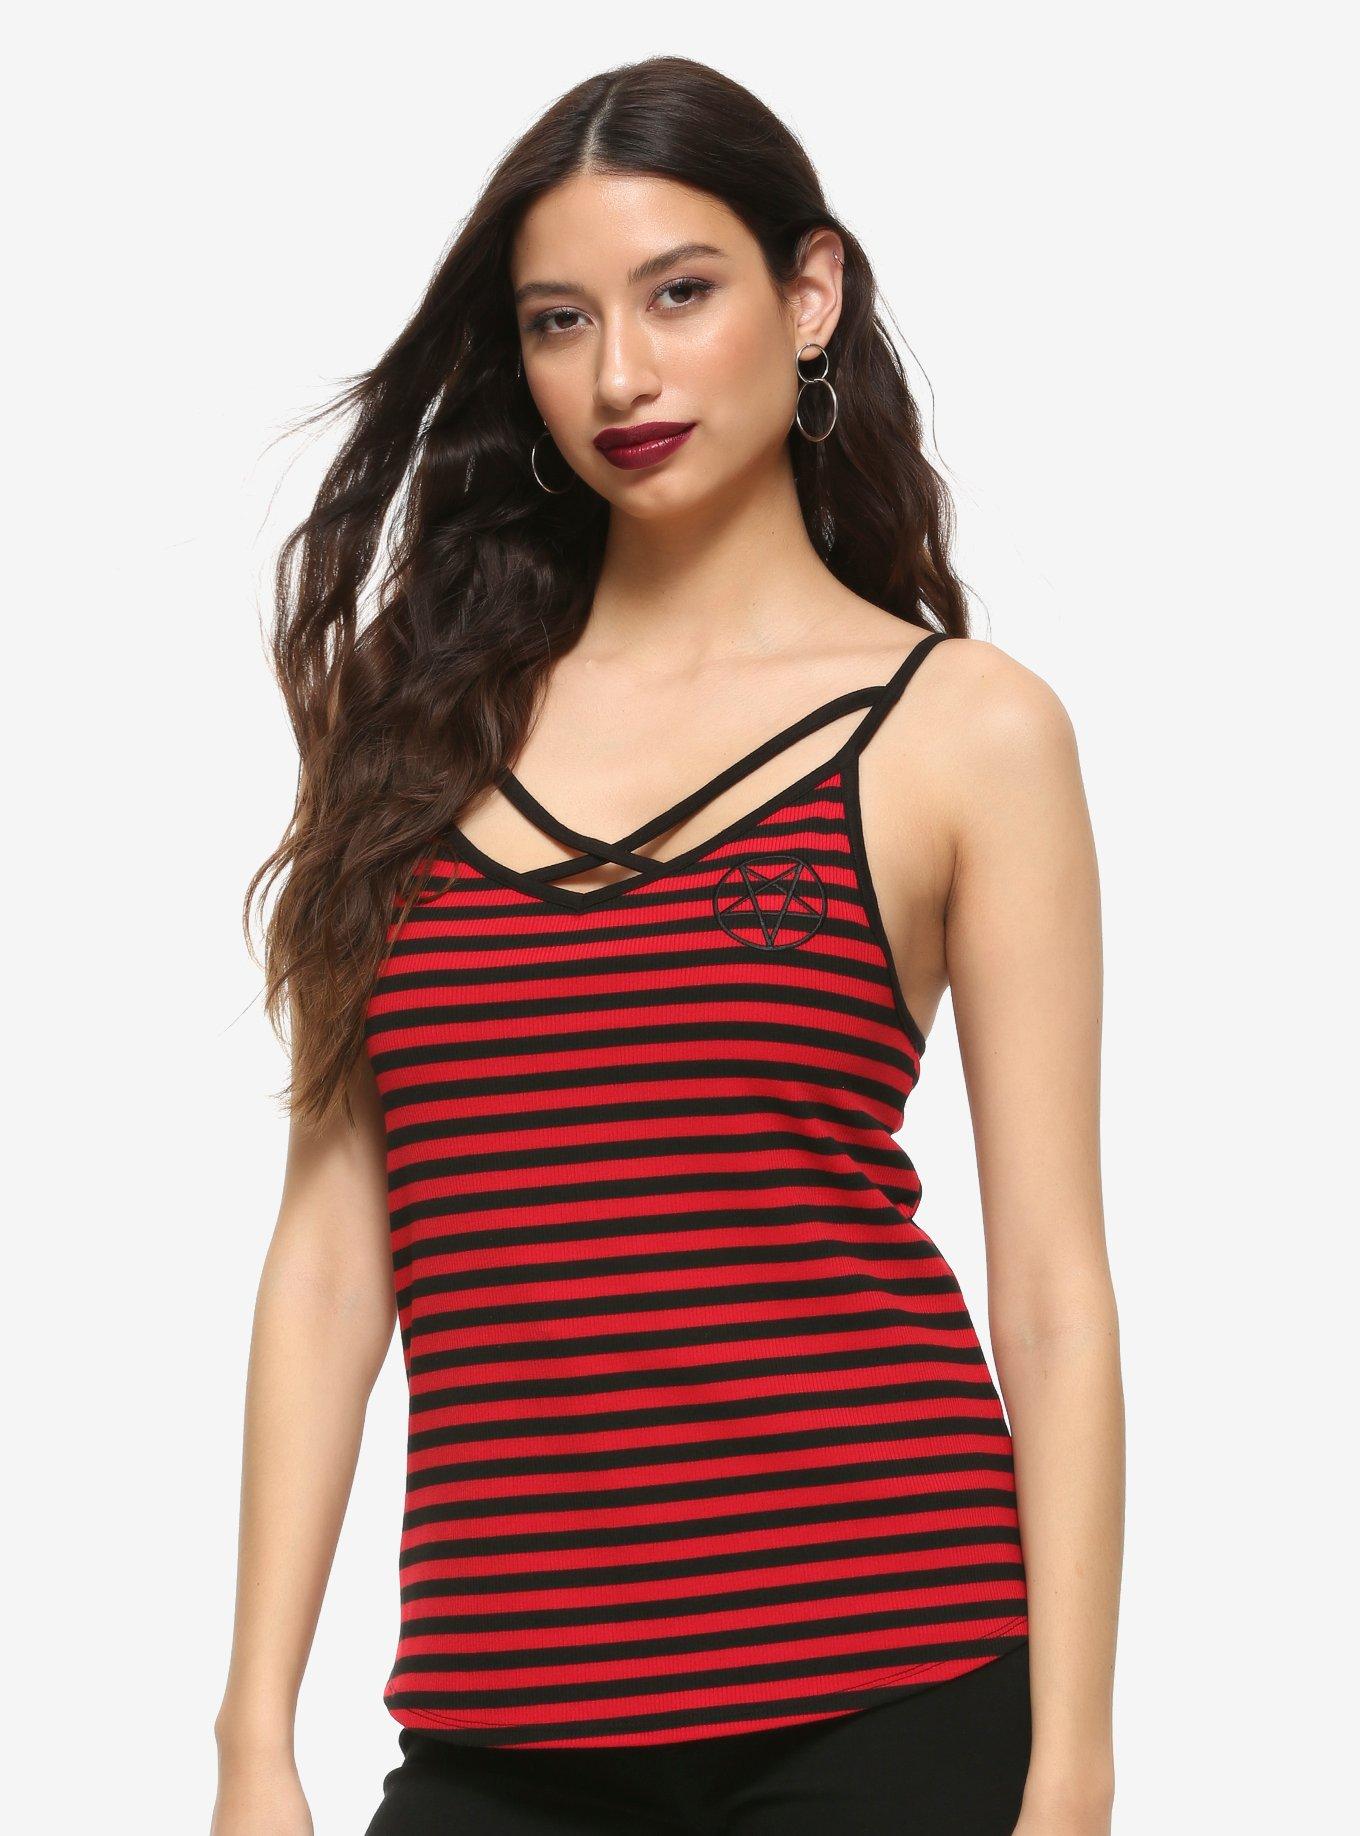 Buttoned Front Strappy Crop Tank Top in Black - Retro, Indie and